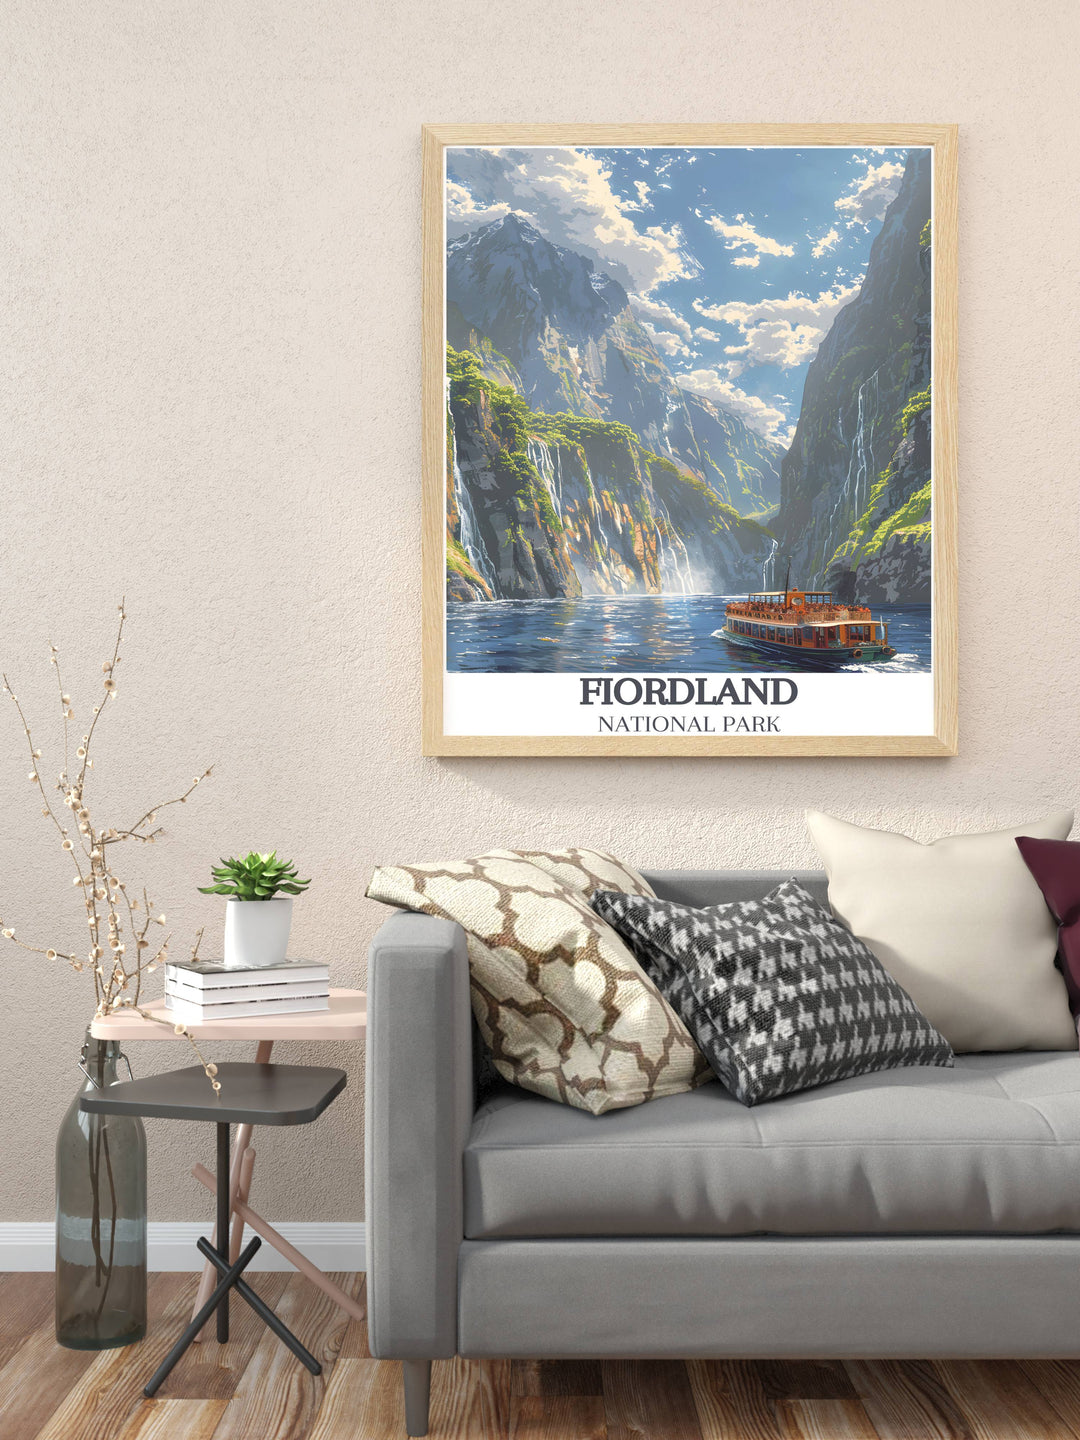 Kayakers exploring the tranquil waters of Milford Sound, surrounded by lush greenery and steep fjords, immortalized in this canvas art.